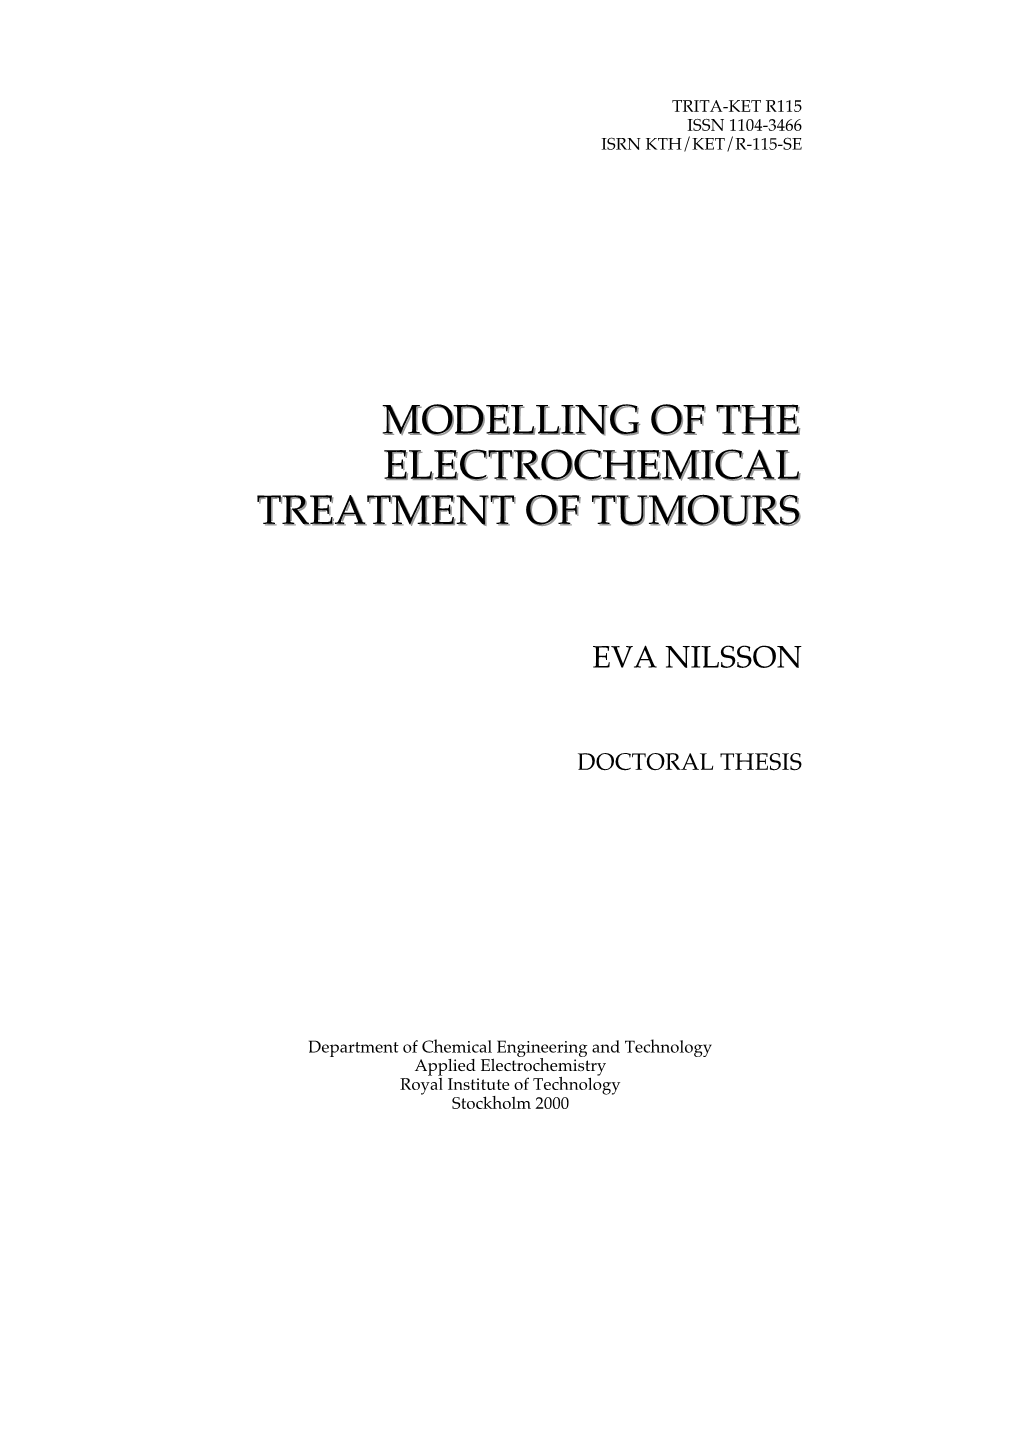 Modelling of the Electrochemical Treatment of Tumours